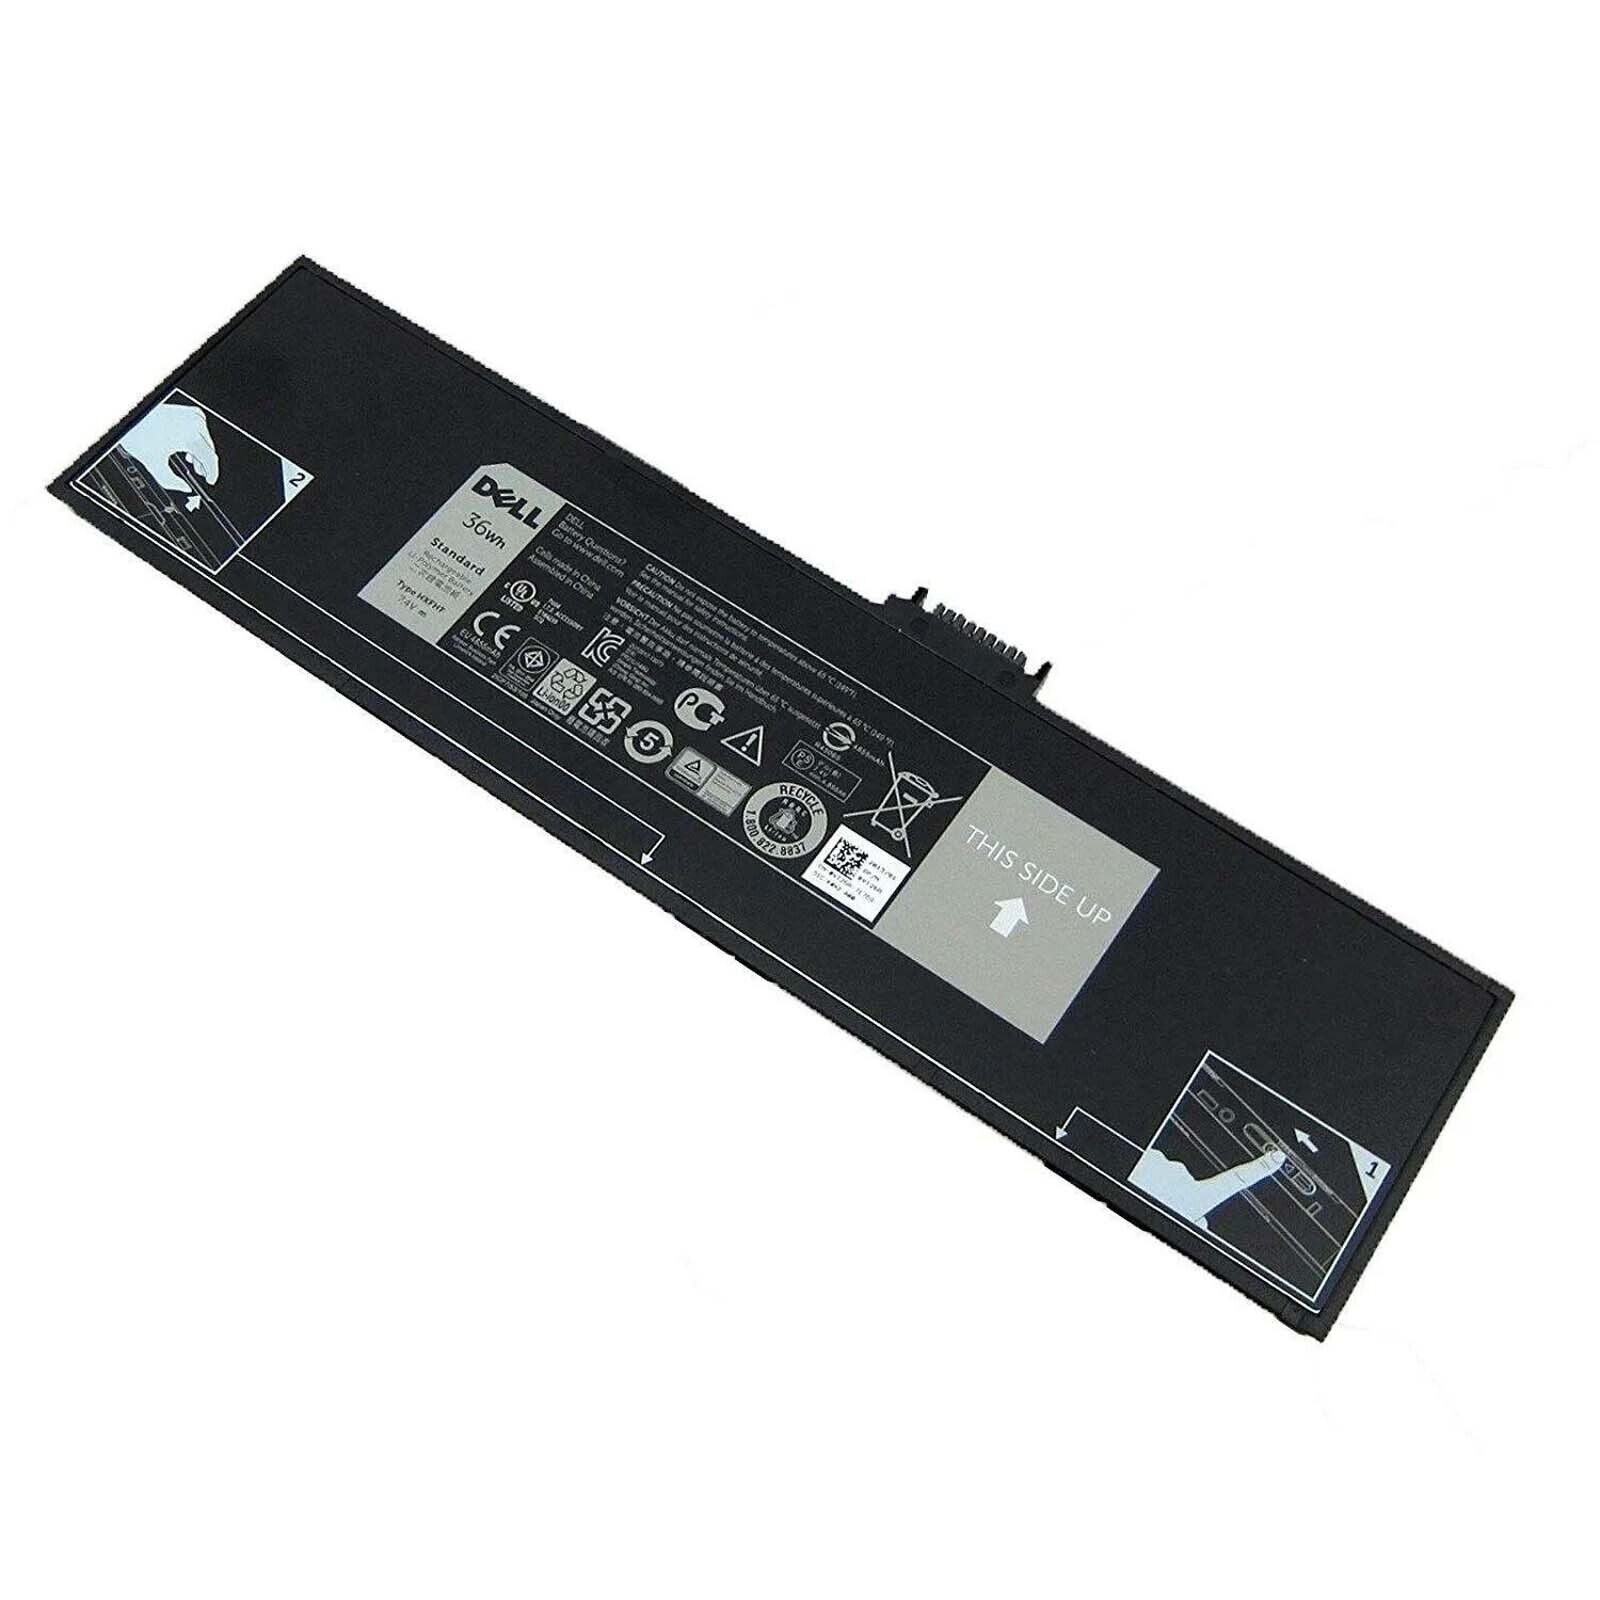 Genuine Battery HXFHF XNY66 VT26R For D ell Venue 11 Pro 7130 7139 7140 Tablet